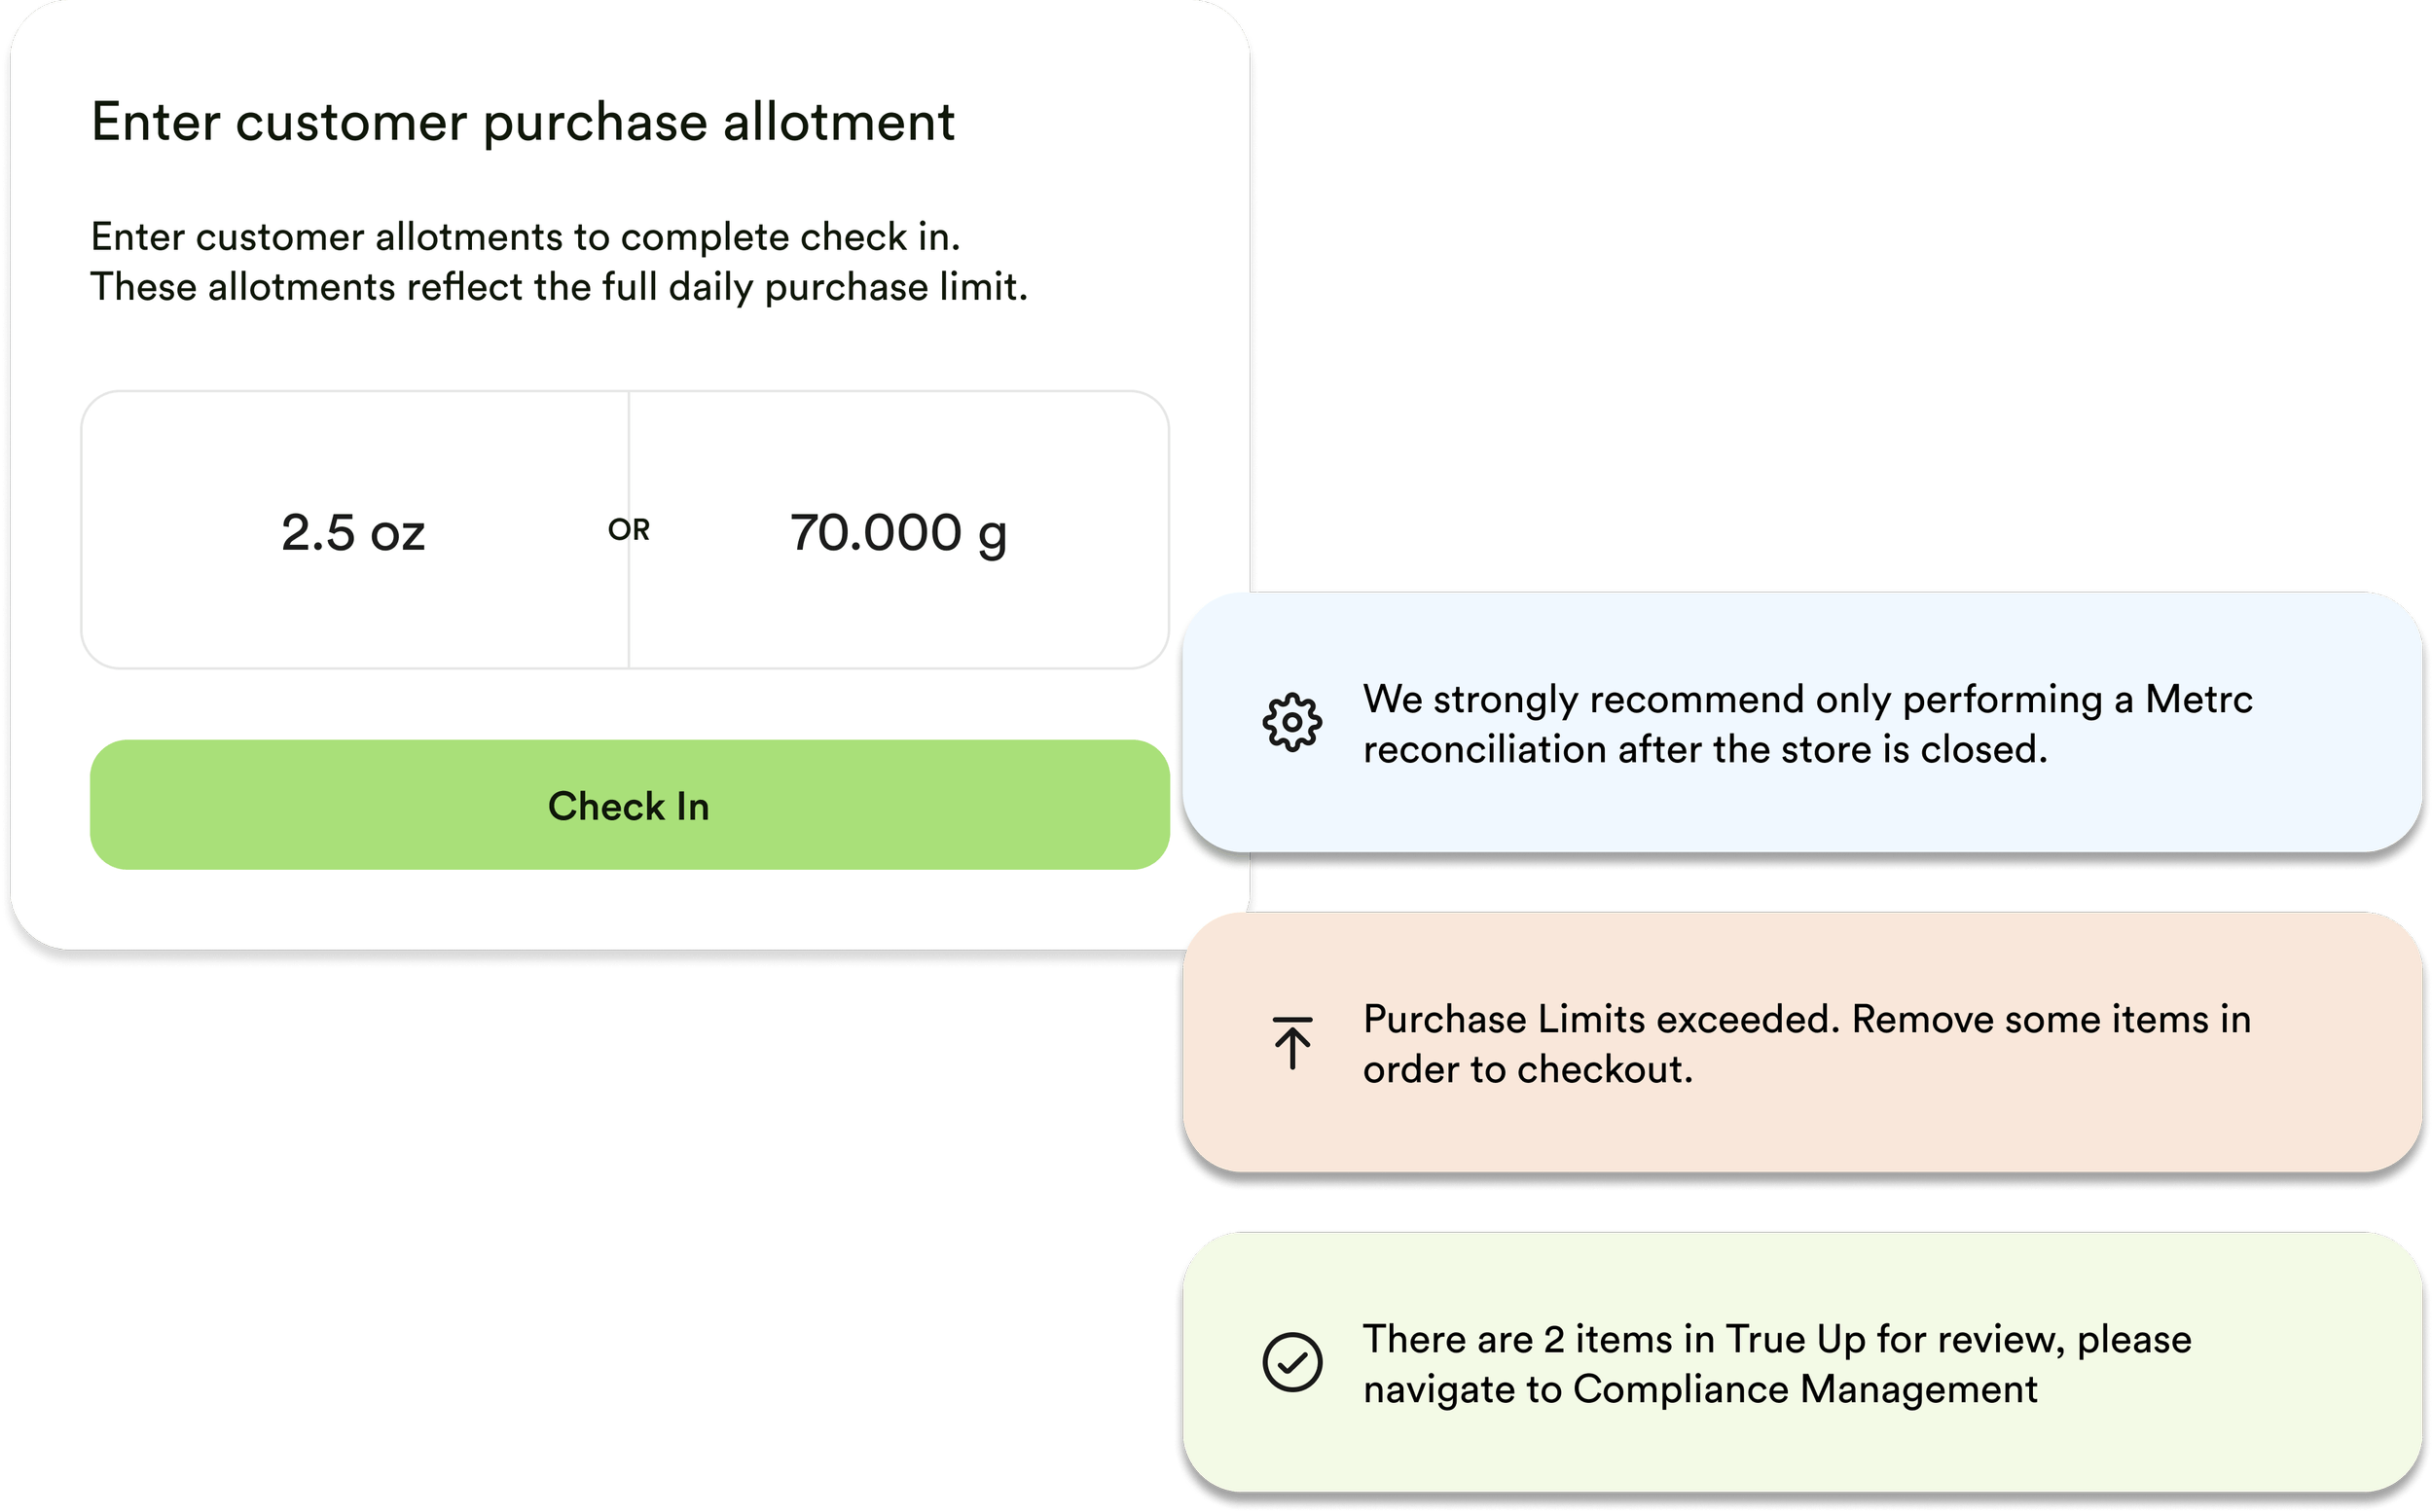 A illustration of a computer screen shows a purchase allotment dialog - enter customer purchase allotment, Metrc reconciliation, purchase limits, and compliance management